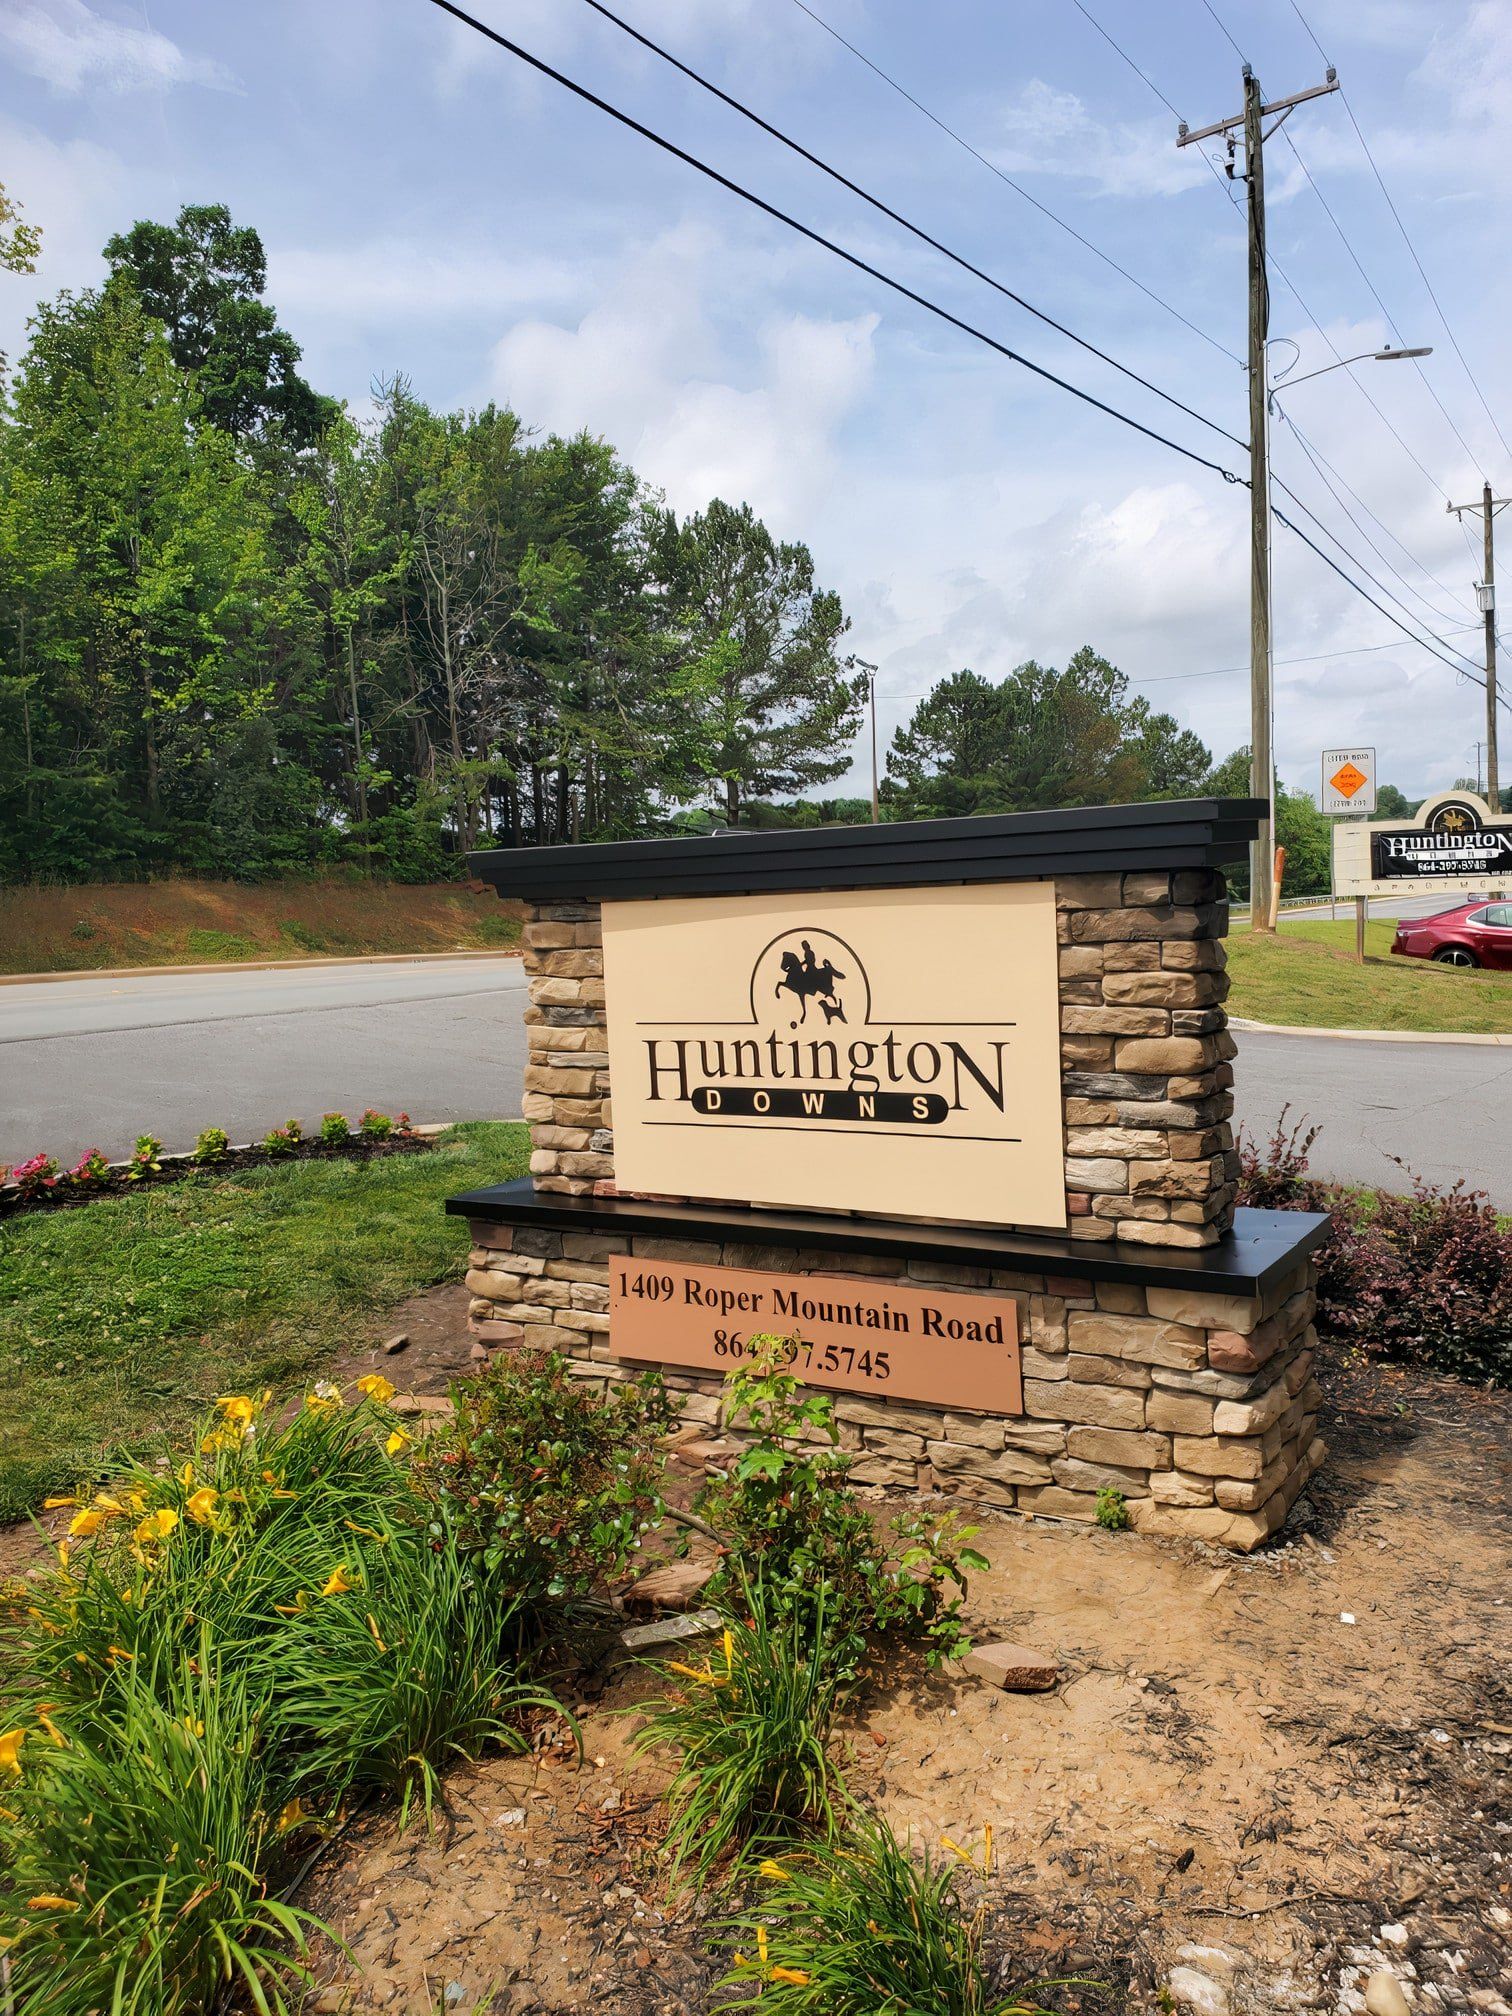 Monument sign for Huntington downs a housing development in greenville sc